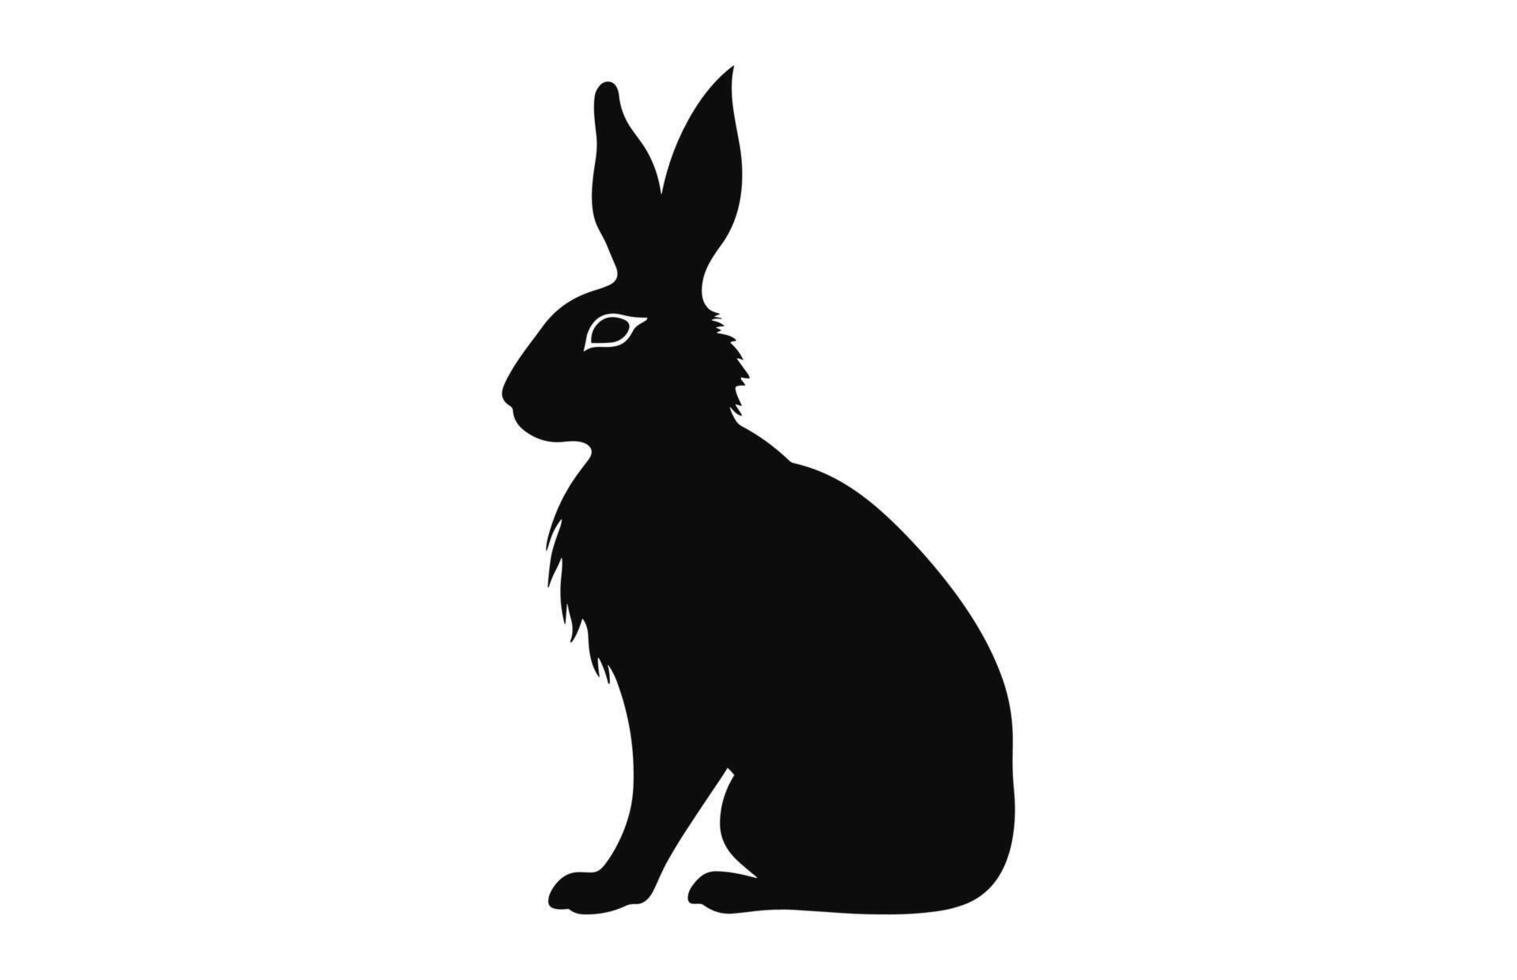 Rabbit vector black silhouette isolated on a white background